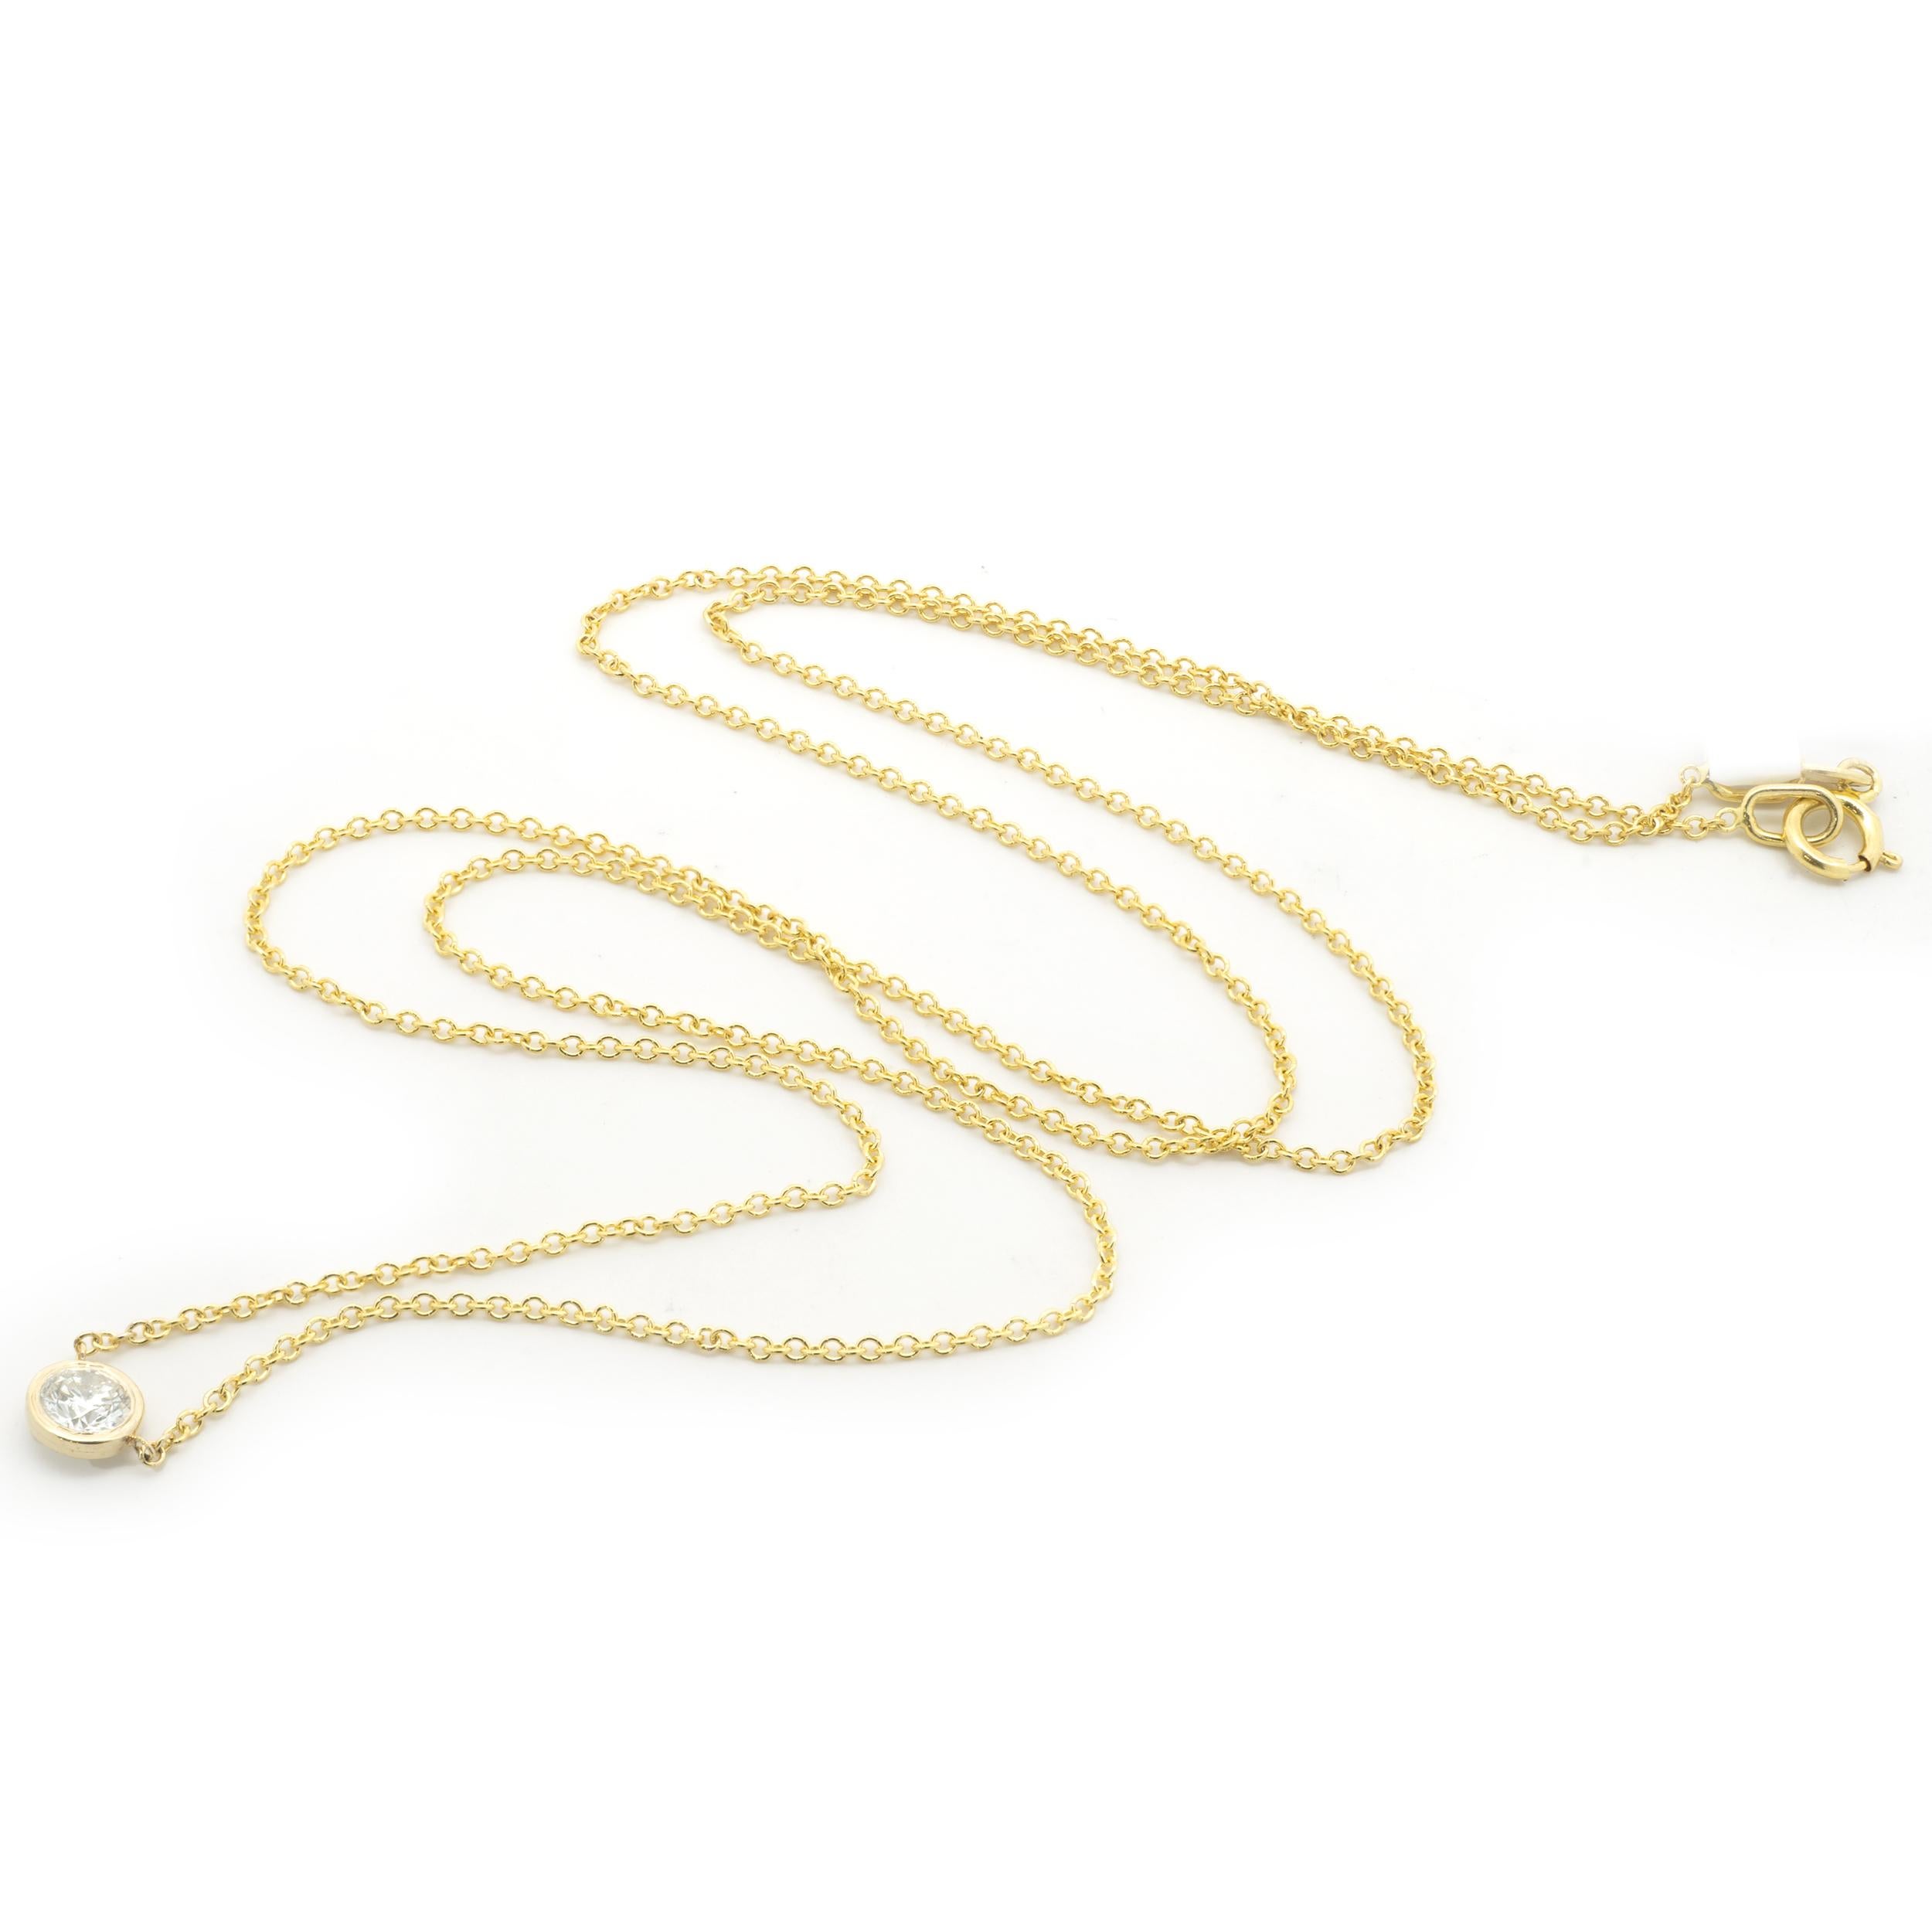 Designer: custom design
Material: 14K yellow gold
Diamonds: 1 round brilliant cut = 0.17cttw
Color: G
Clarity: SI1
Dimensions: necklace measures 16-inches in length 
Weight: 1.37 grams
